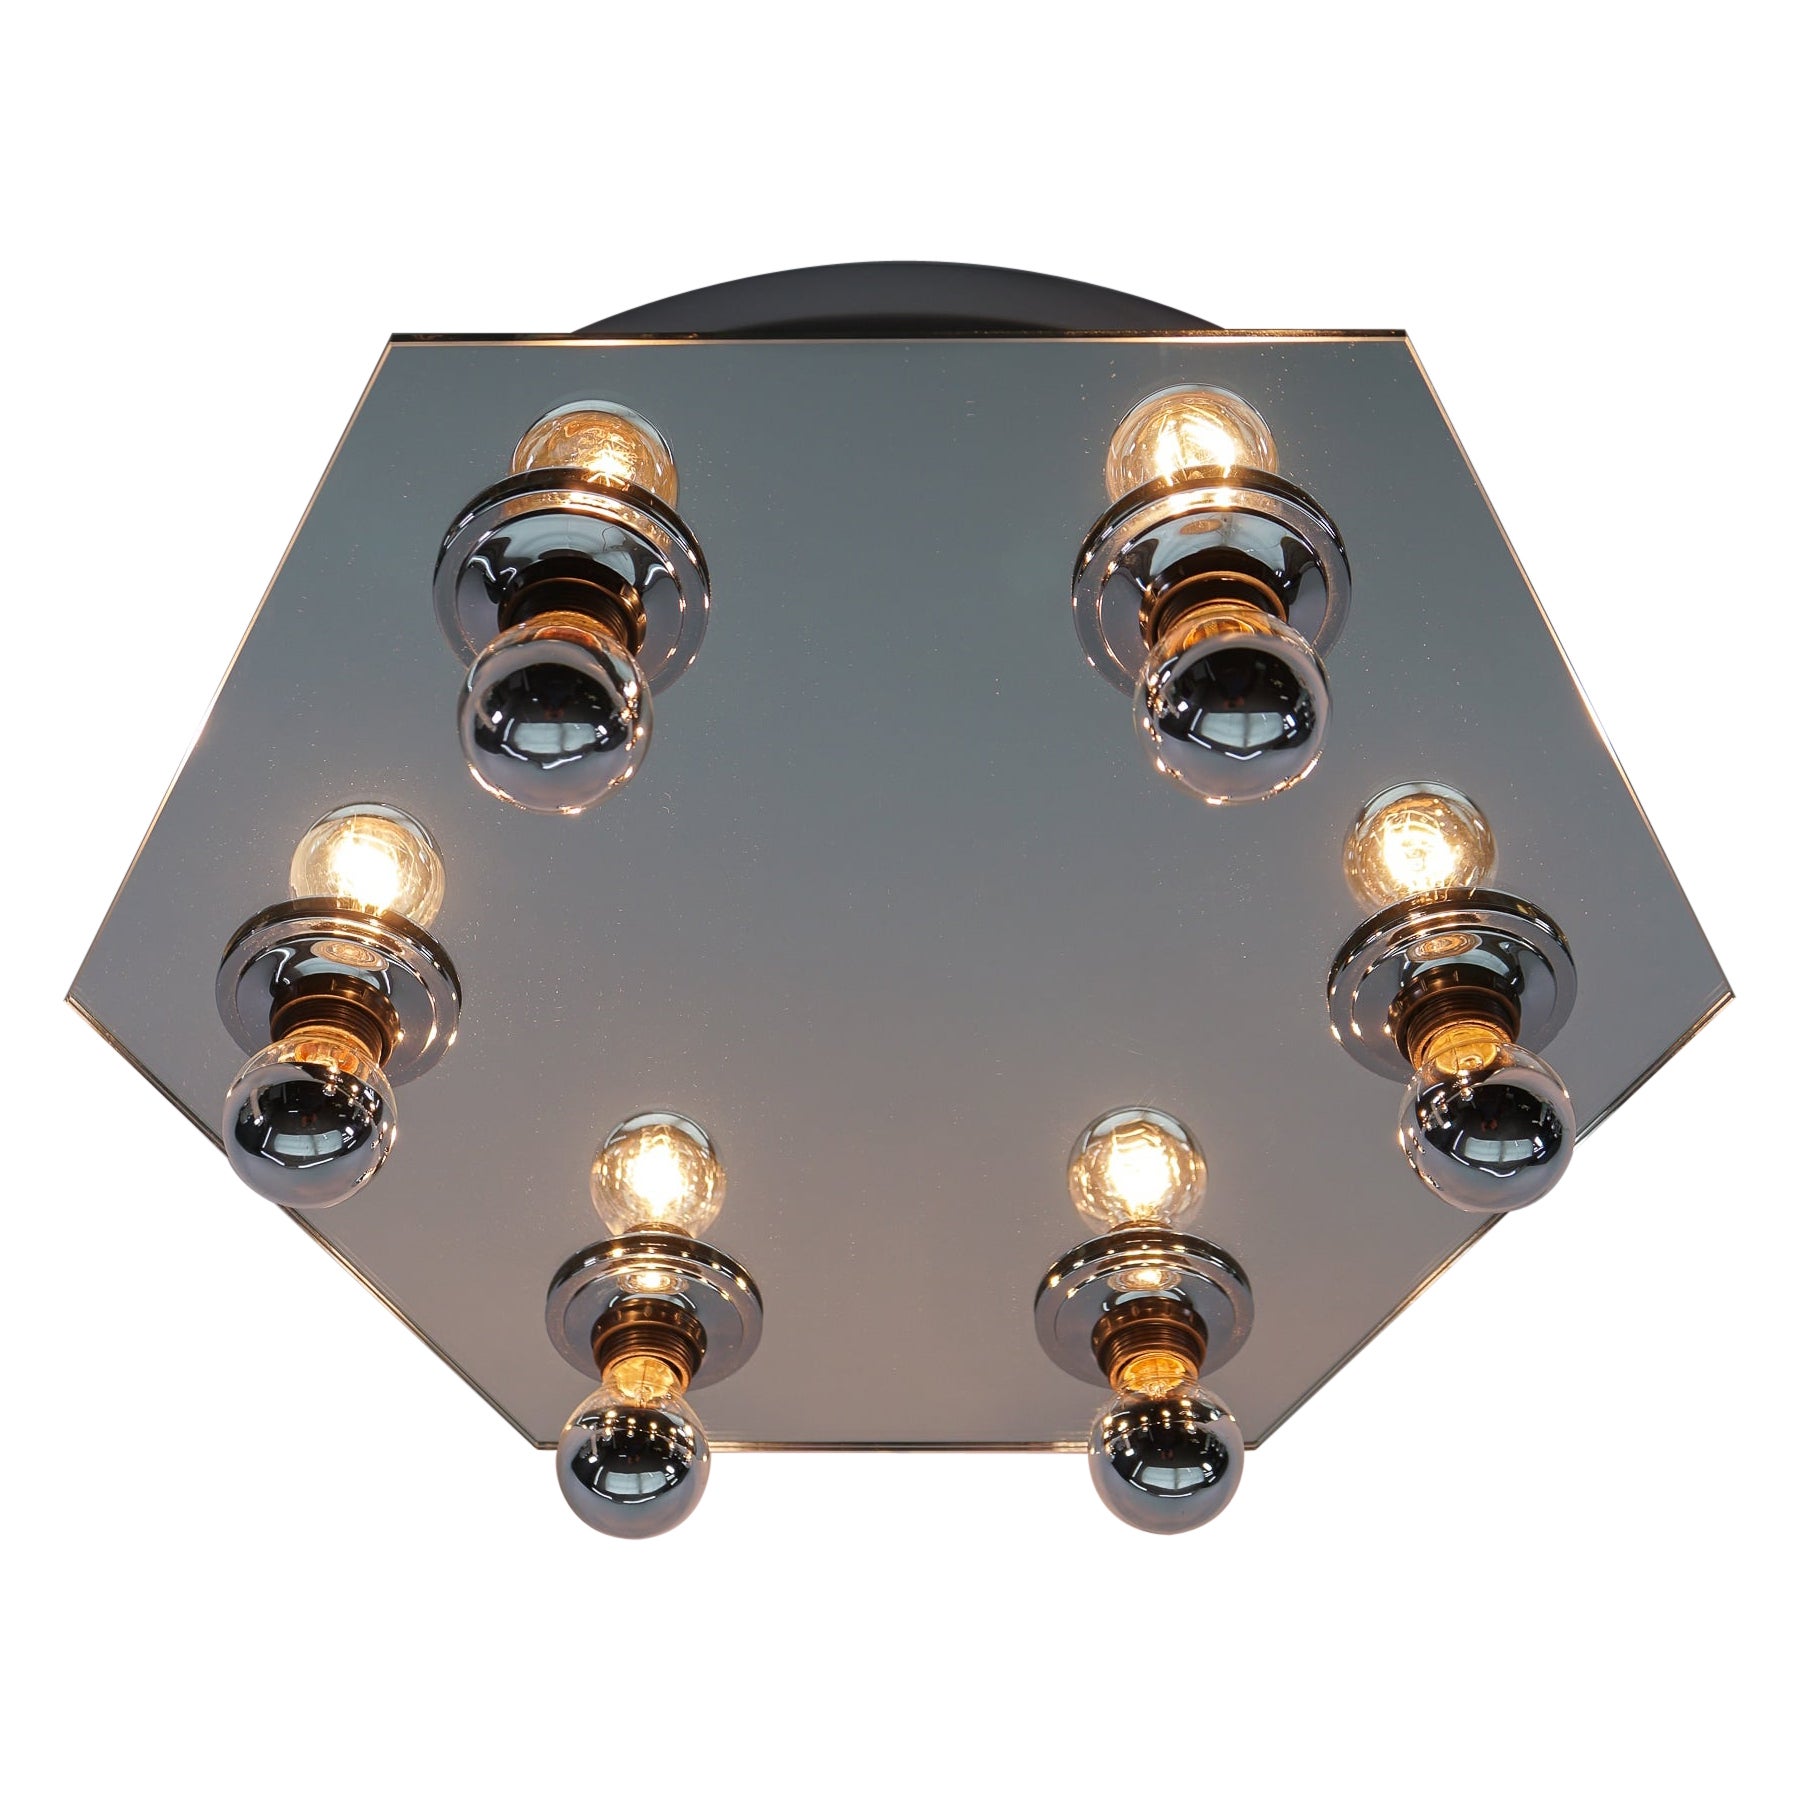 Hexagonal Mirrored Ceiling Lamp With Six Light Bulbs, 1970s Italy For Sale